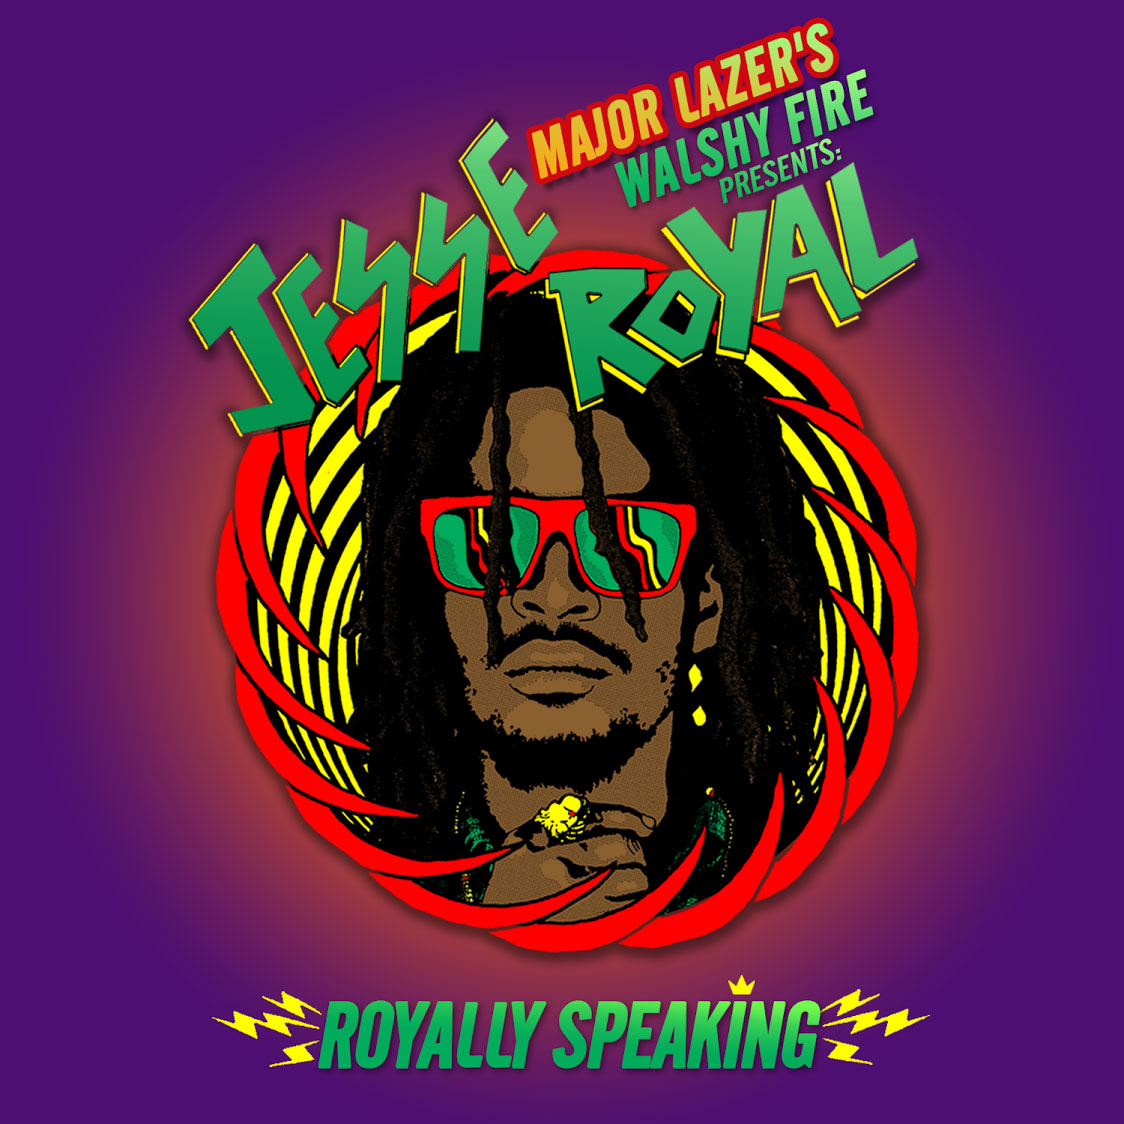 Reggae royalty in the house!

Turn back to 2014 and revisit @walshyfire of @majorlazer dropping pure Reggae vibes with 'Royally Speaking.' Mix ft 25 blazing tracks by @jesseroyal1!

#DSM973Mix #DSM973Throwback stream/download this Reggae gem! ➡️ dream-sound.com/jesse-royal-ro…